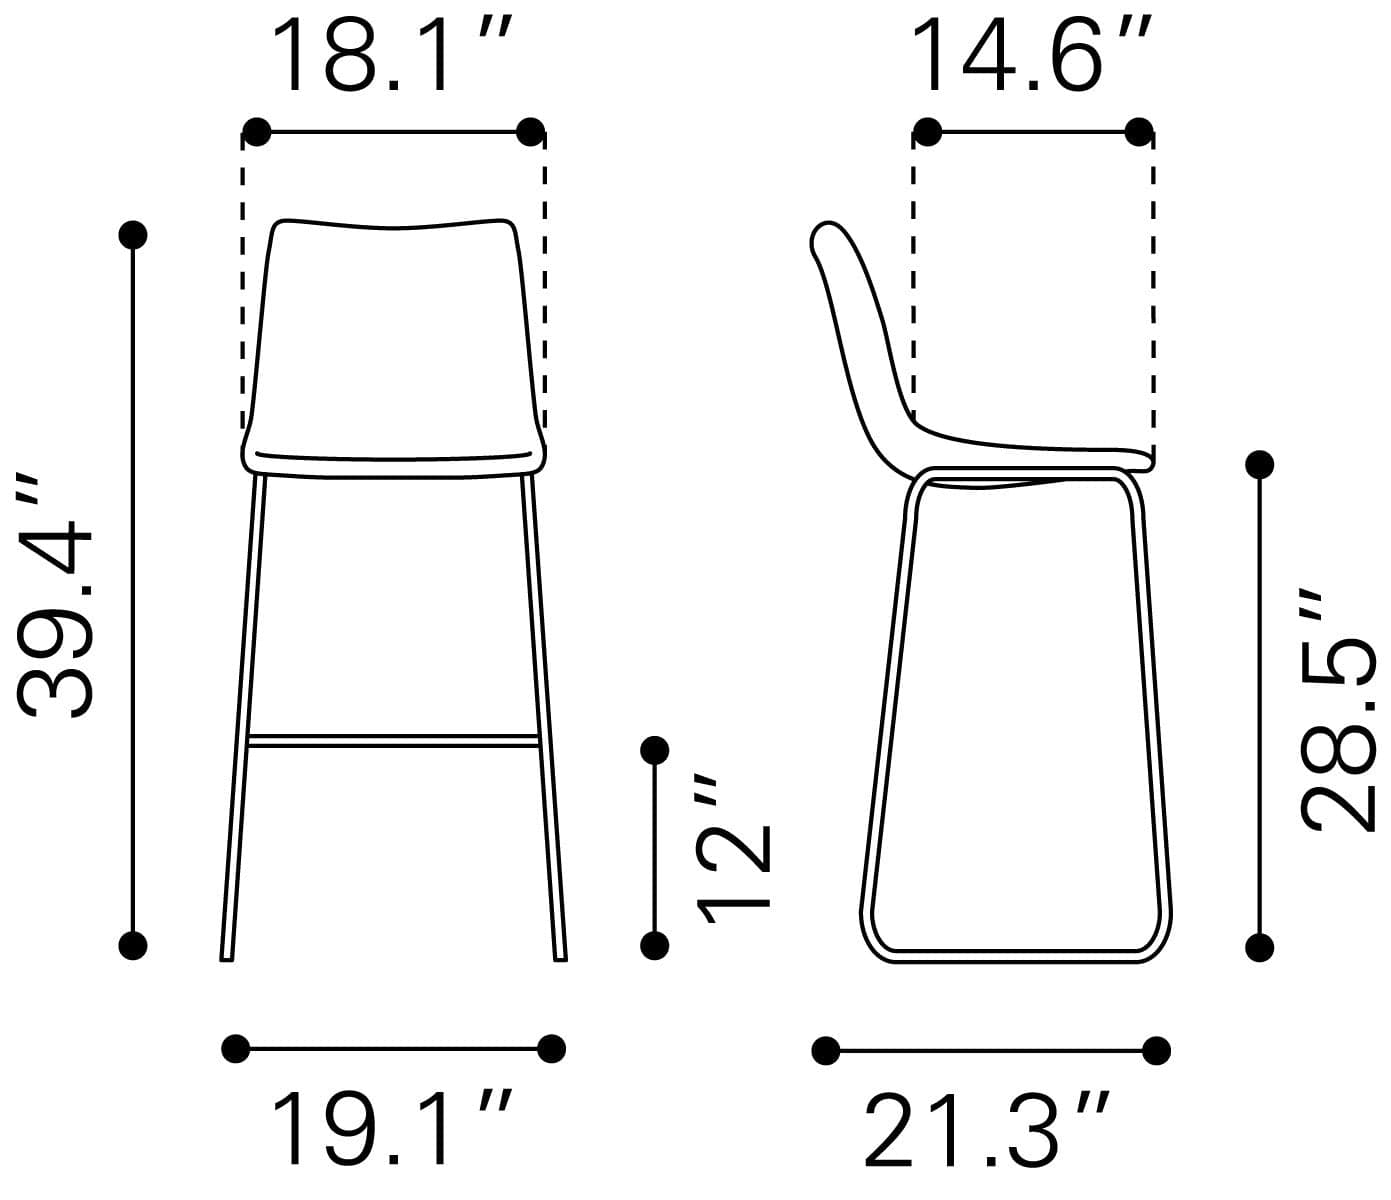 Dimensions of Smart Bar Chair